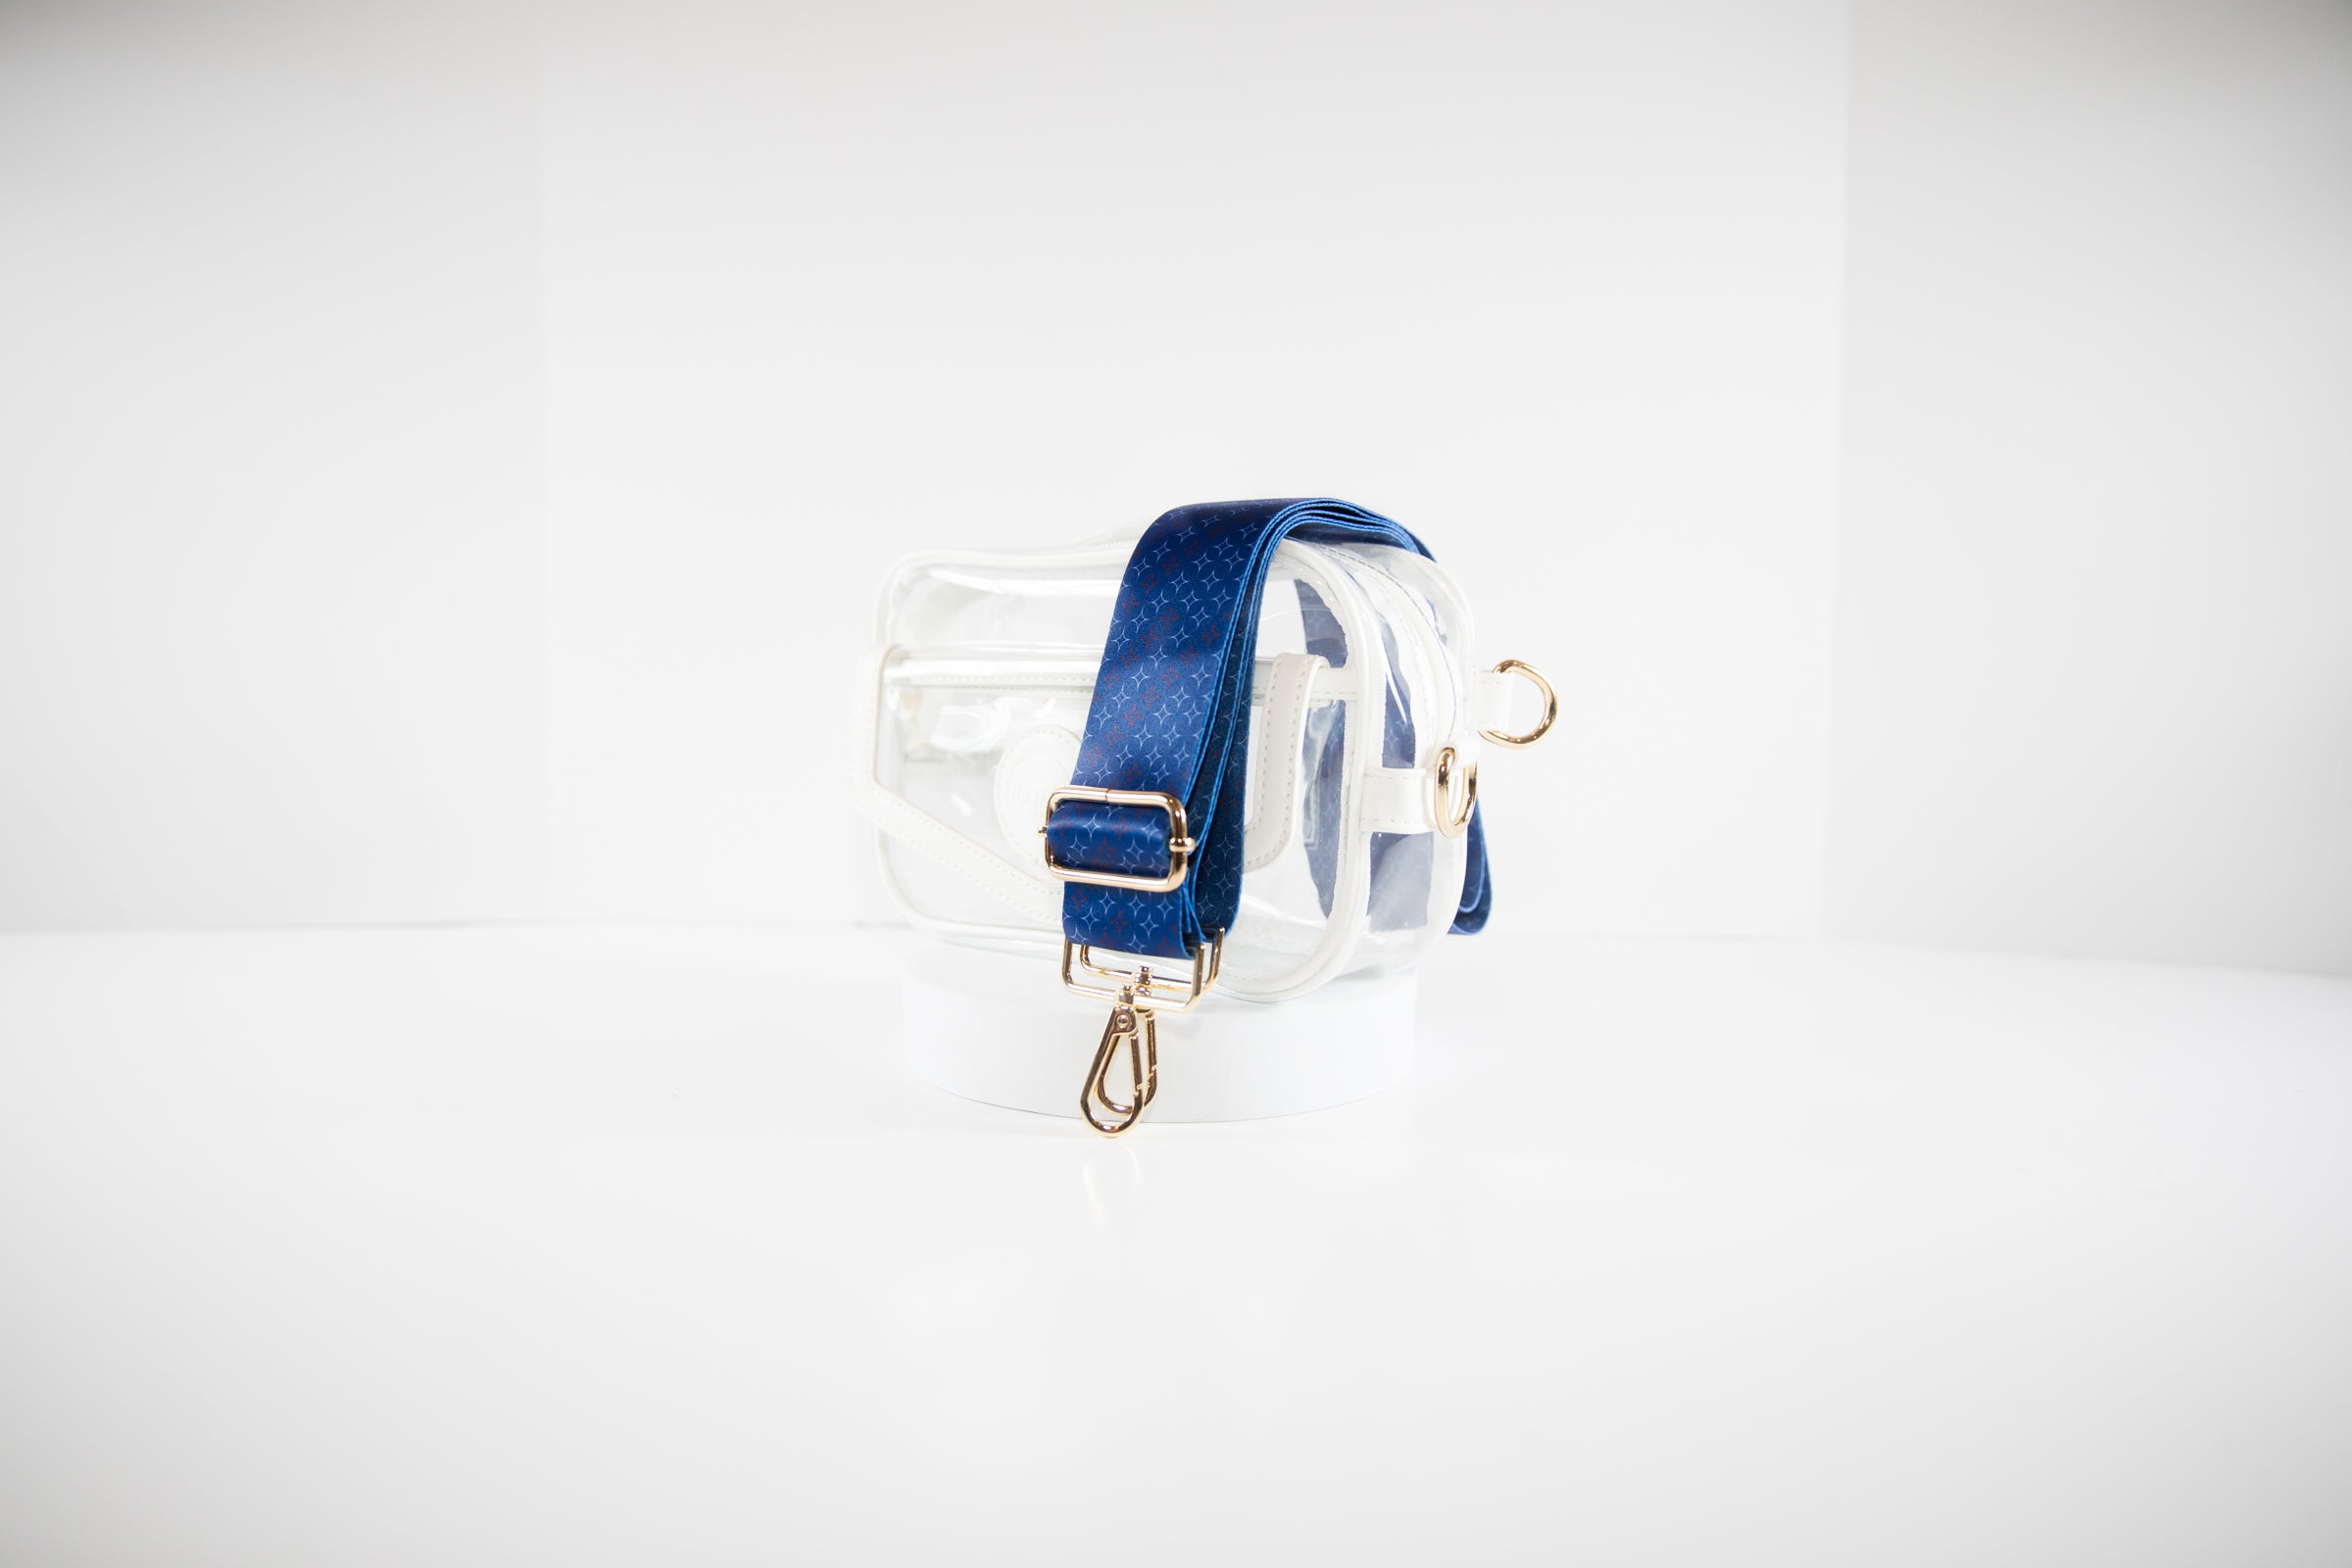 Clear stadium bag shown in white leather trim with a crossbody strap in red, white and blue team colors of the Chicago Cubs.